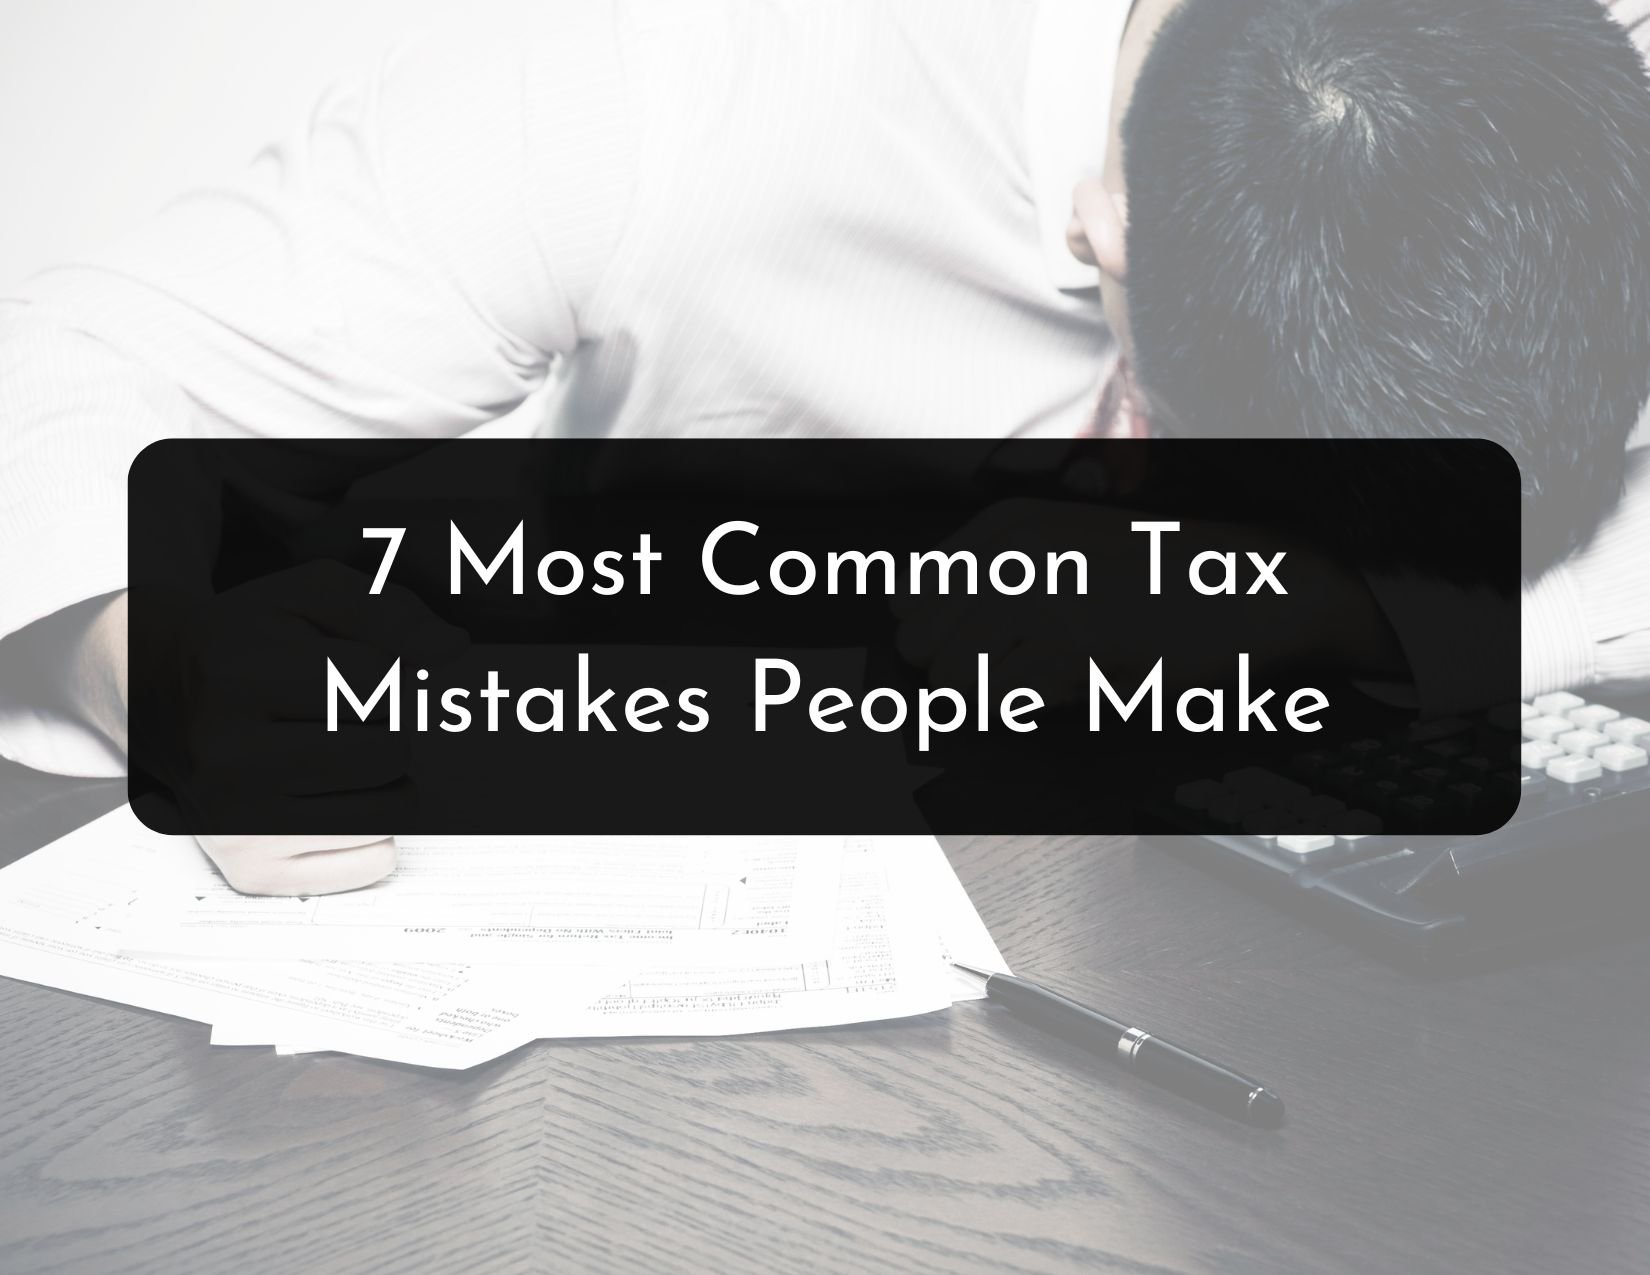 What Are The Most Common Tax Mistakes?